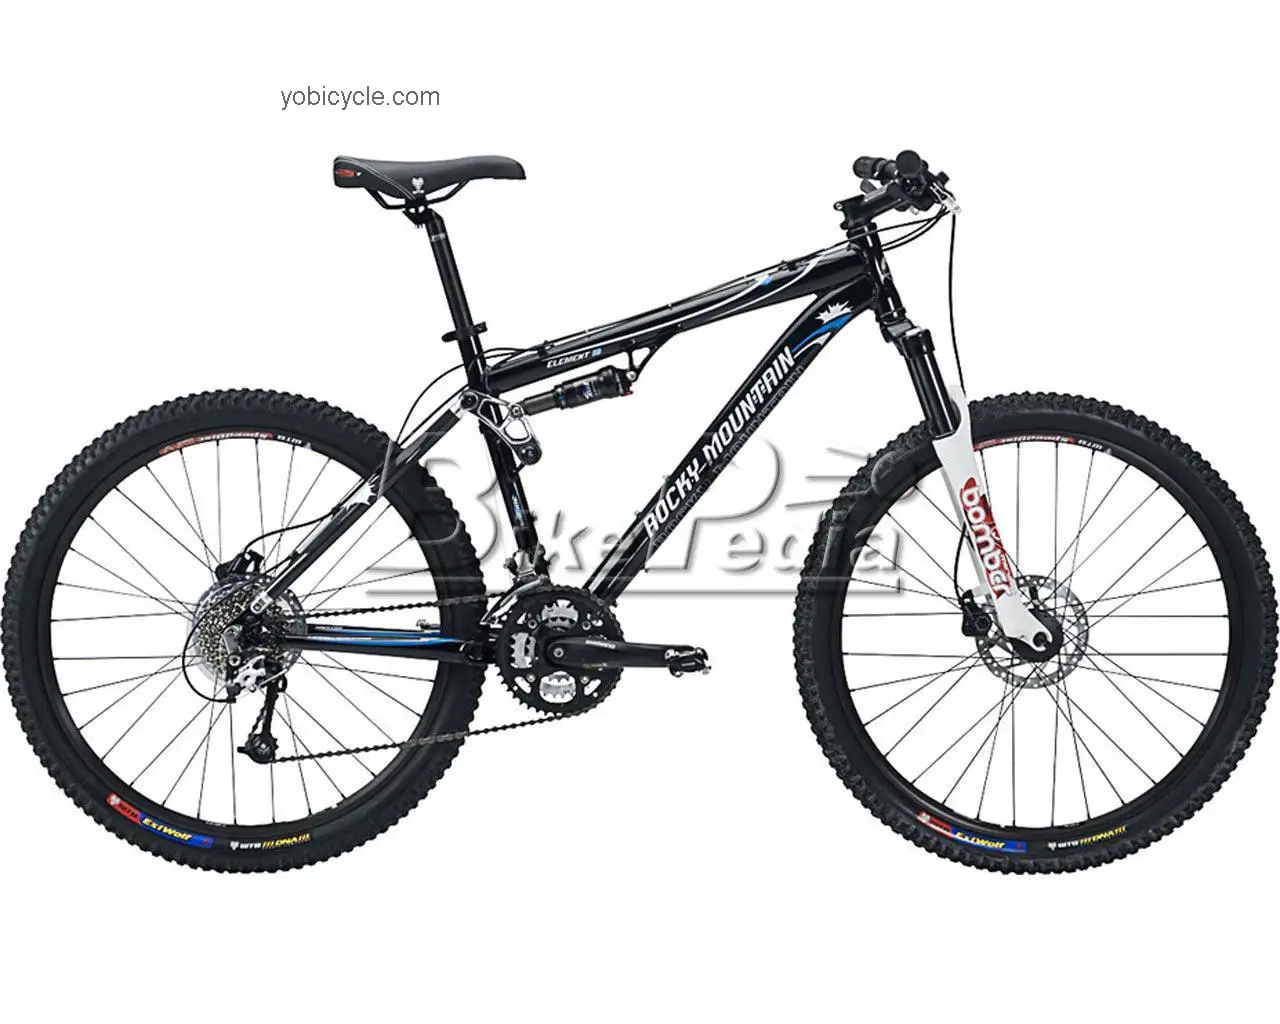 Rocky Mountain Element 10 2009 comparison online with competitors